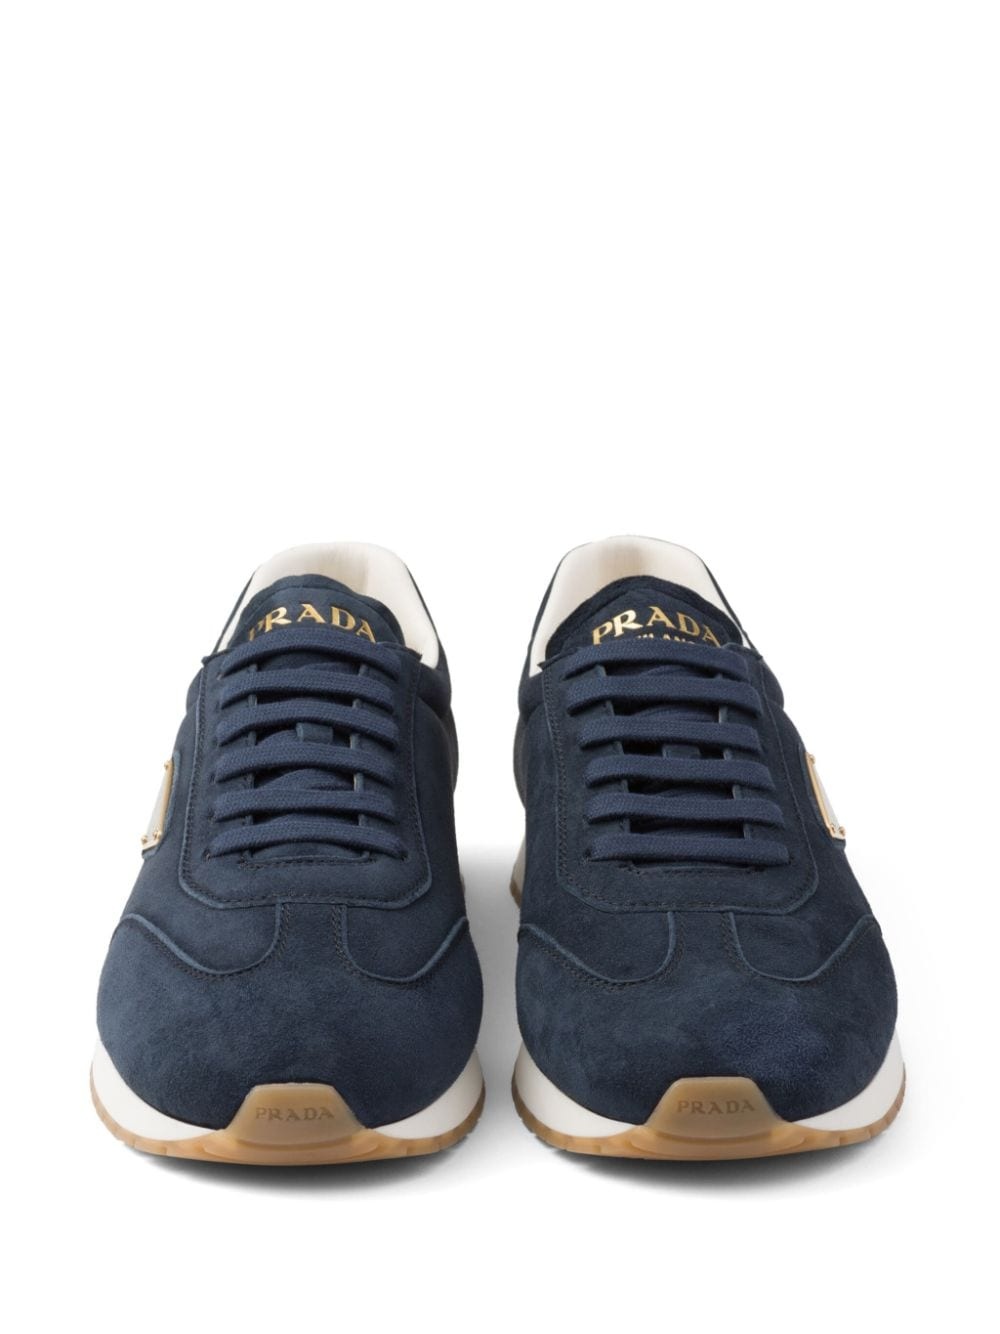 triangle-logo suede sneakers - 5